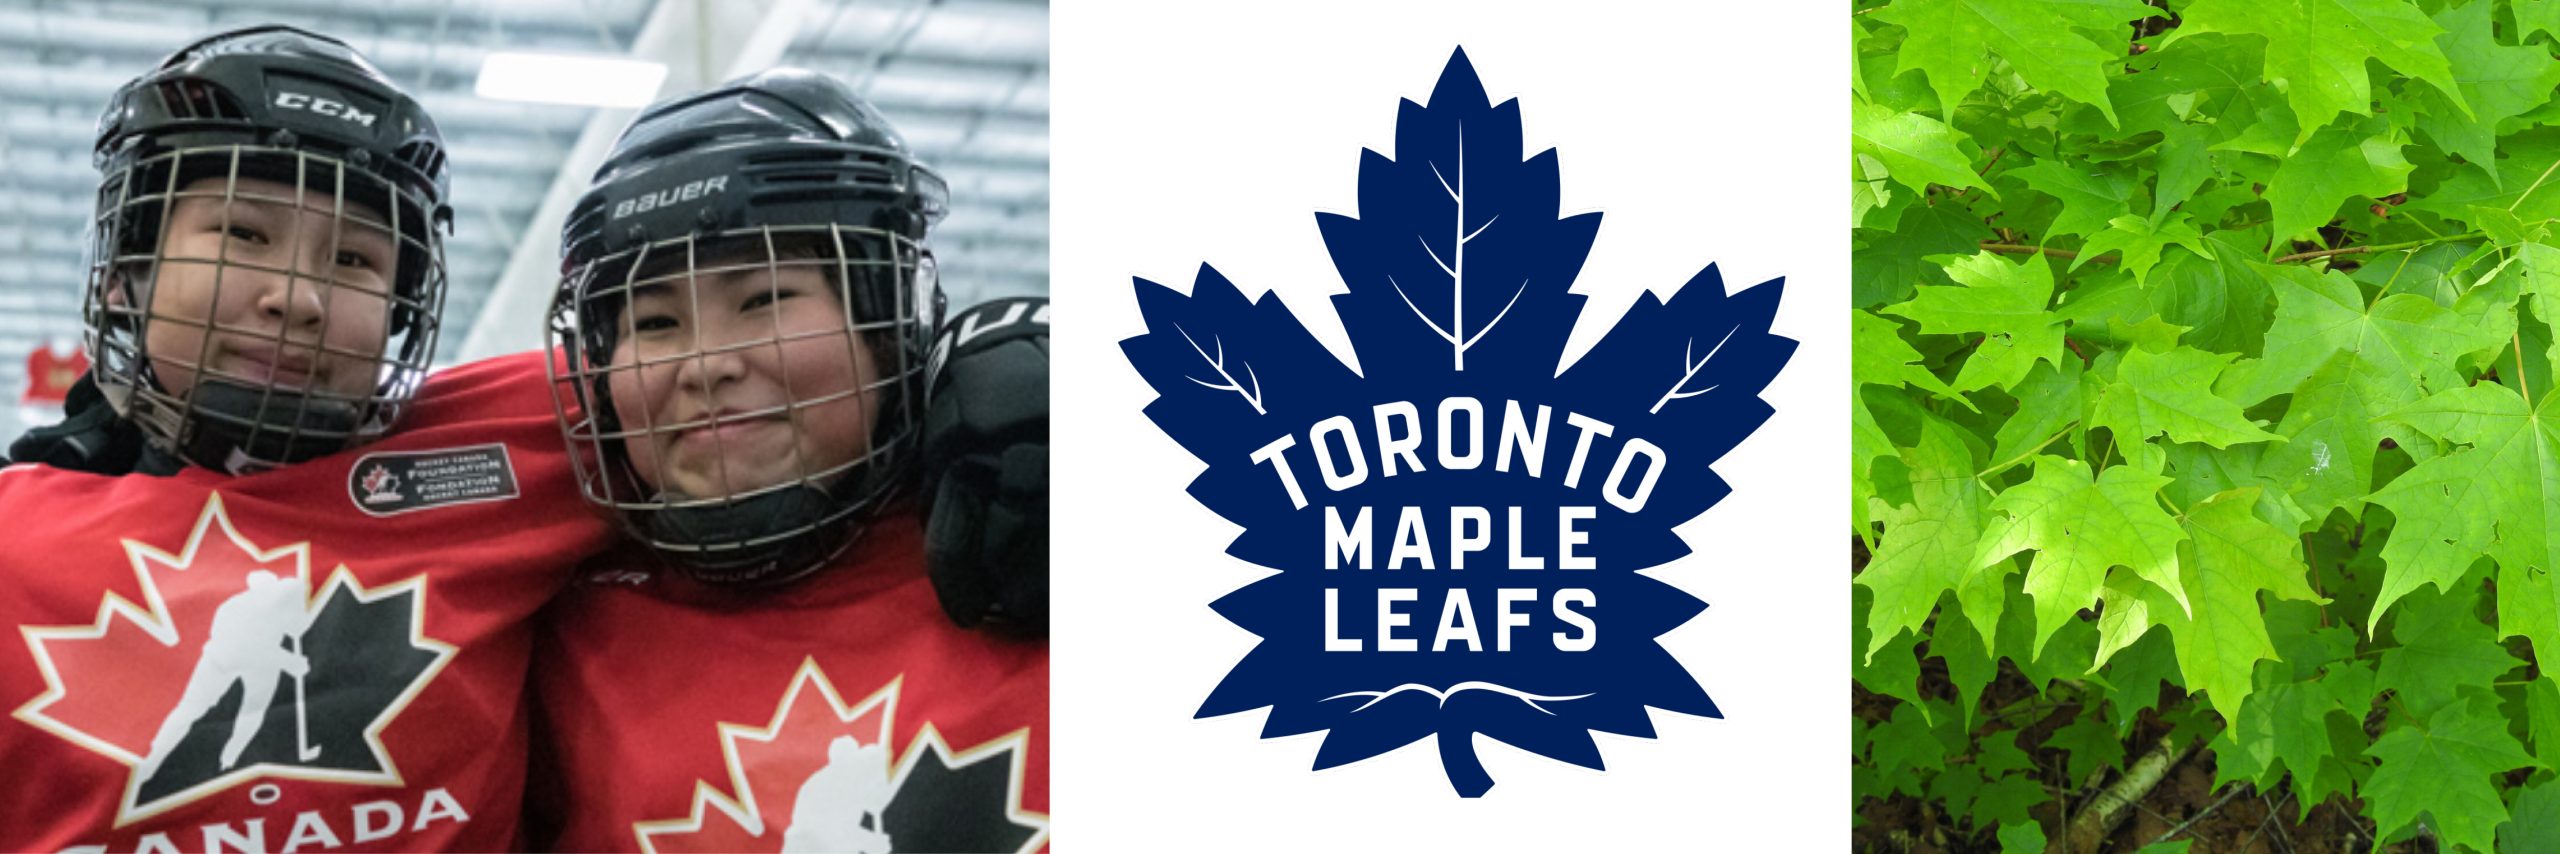 Stylized sugar maple leaves on the Canadian national hockey team uniform and Toronto Maple Leafs logo. Right: Sugar maple (Acer saccharum).